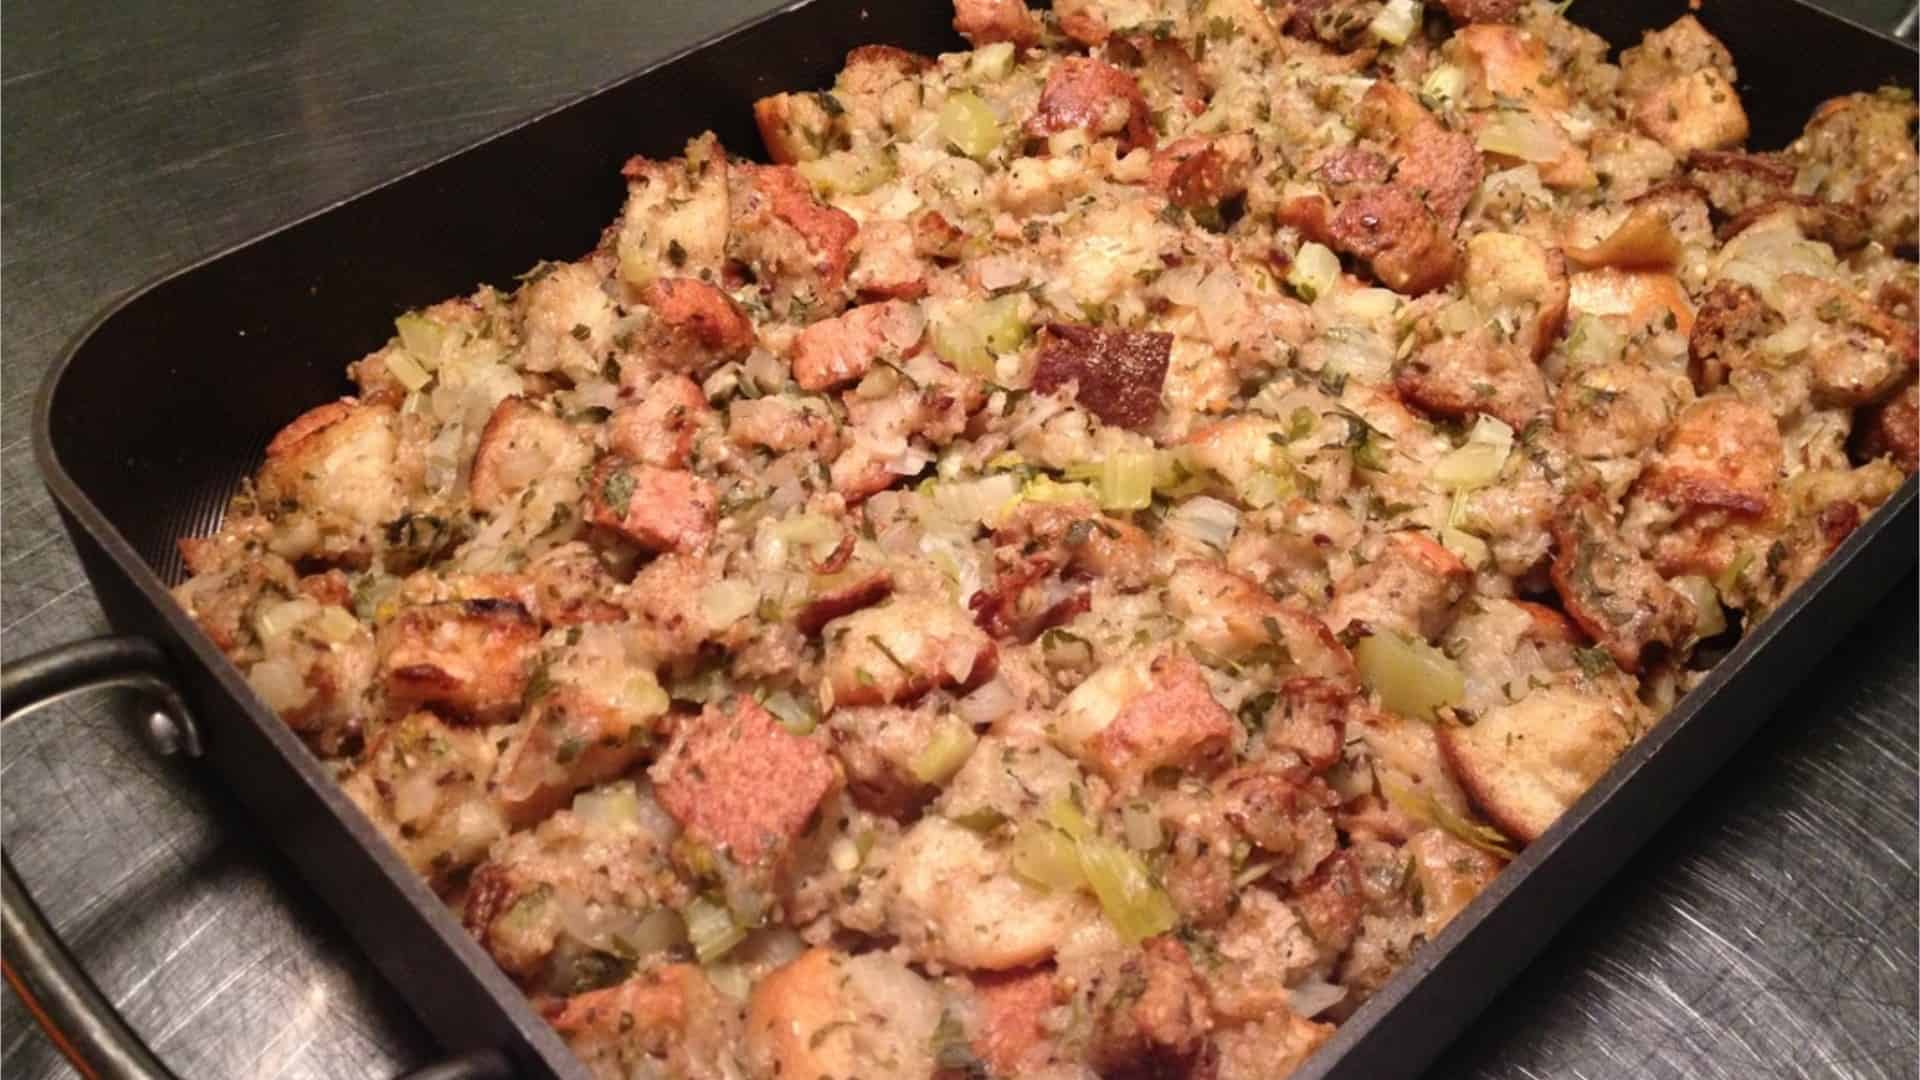 Stuff Yourself Stuffing - © ProtectiveDiet.com